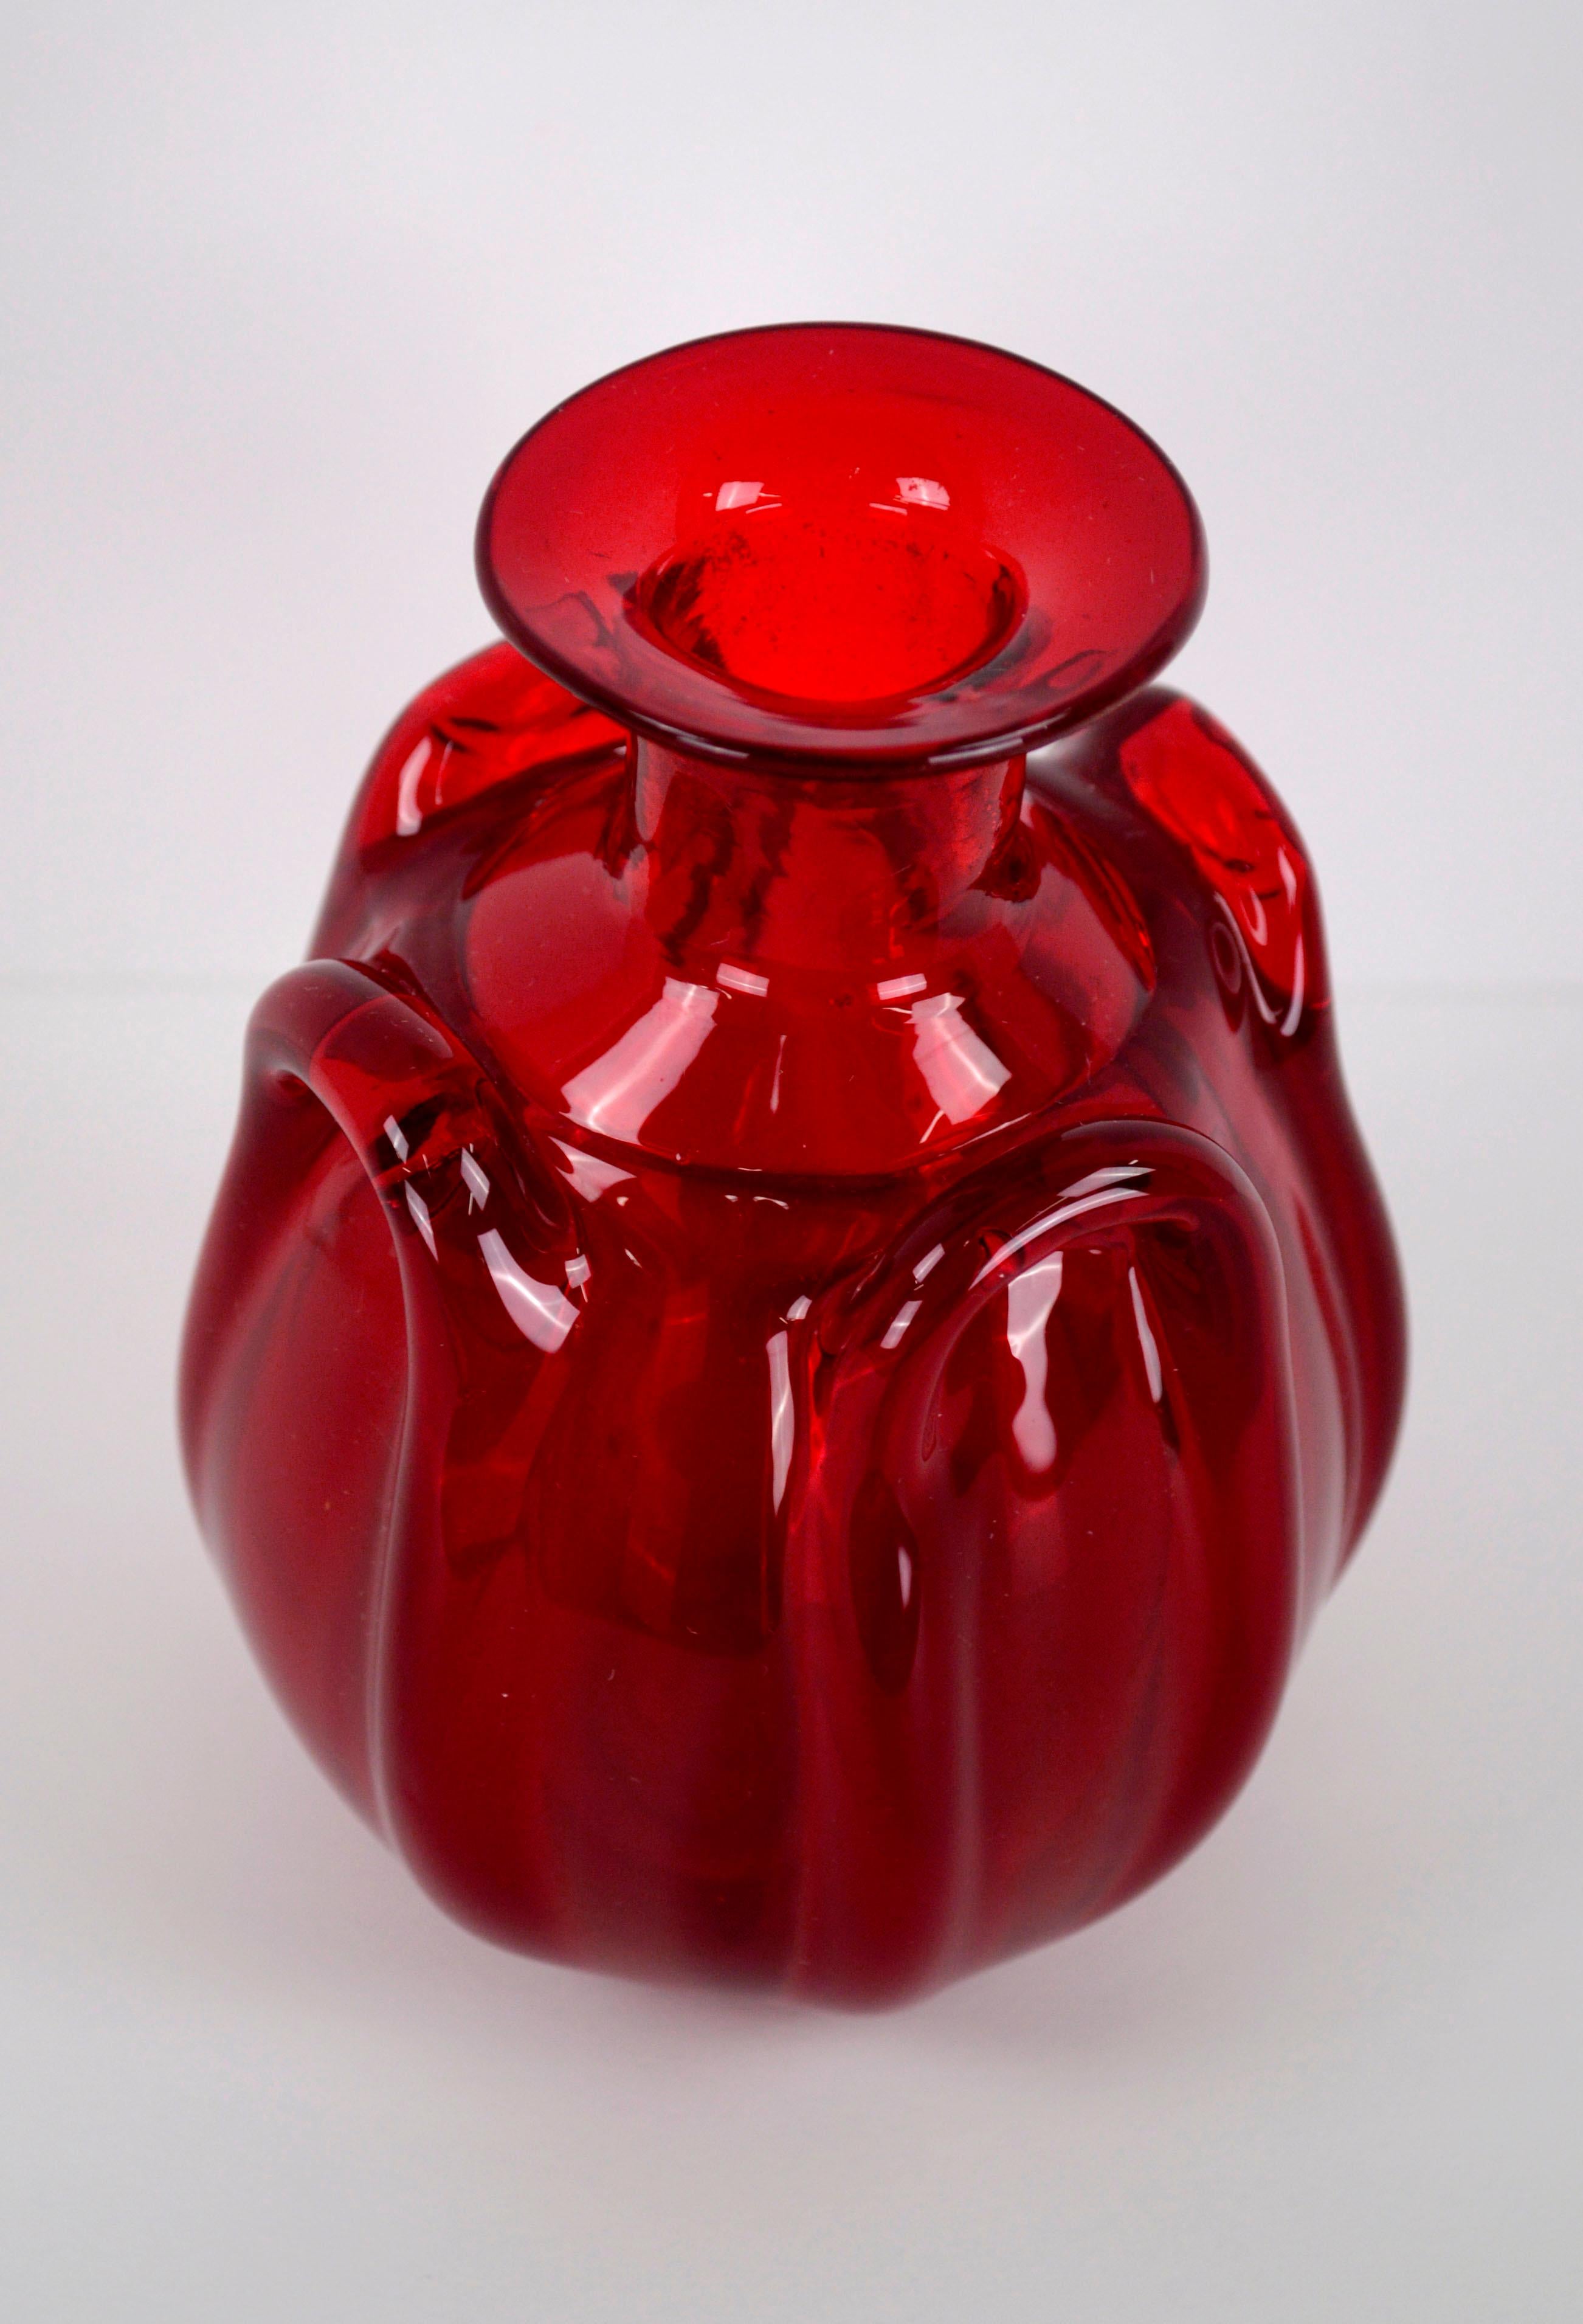 Small Mid-Century Modern Red Murano Glass Bud Vase

Bright translucent red hand blown Murano glass bud vase, with four large ridged details. One very small inclusion (firing blemish) on bottom edge, as shown in photos. Measures 4